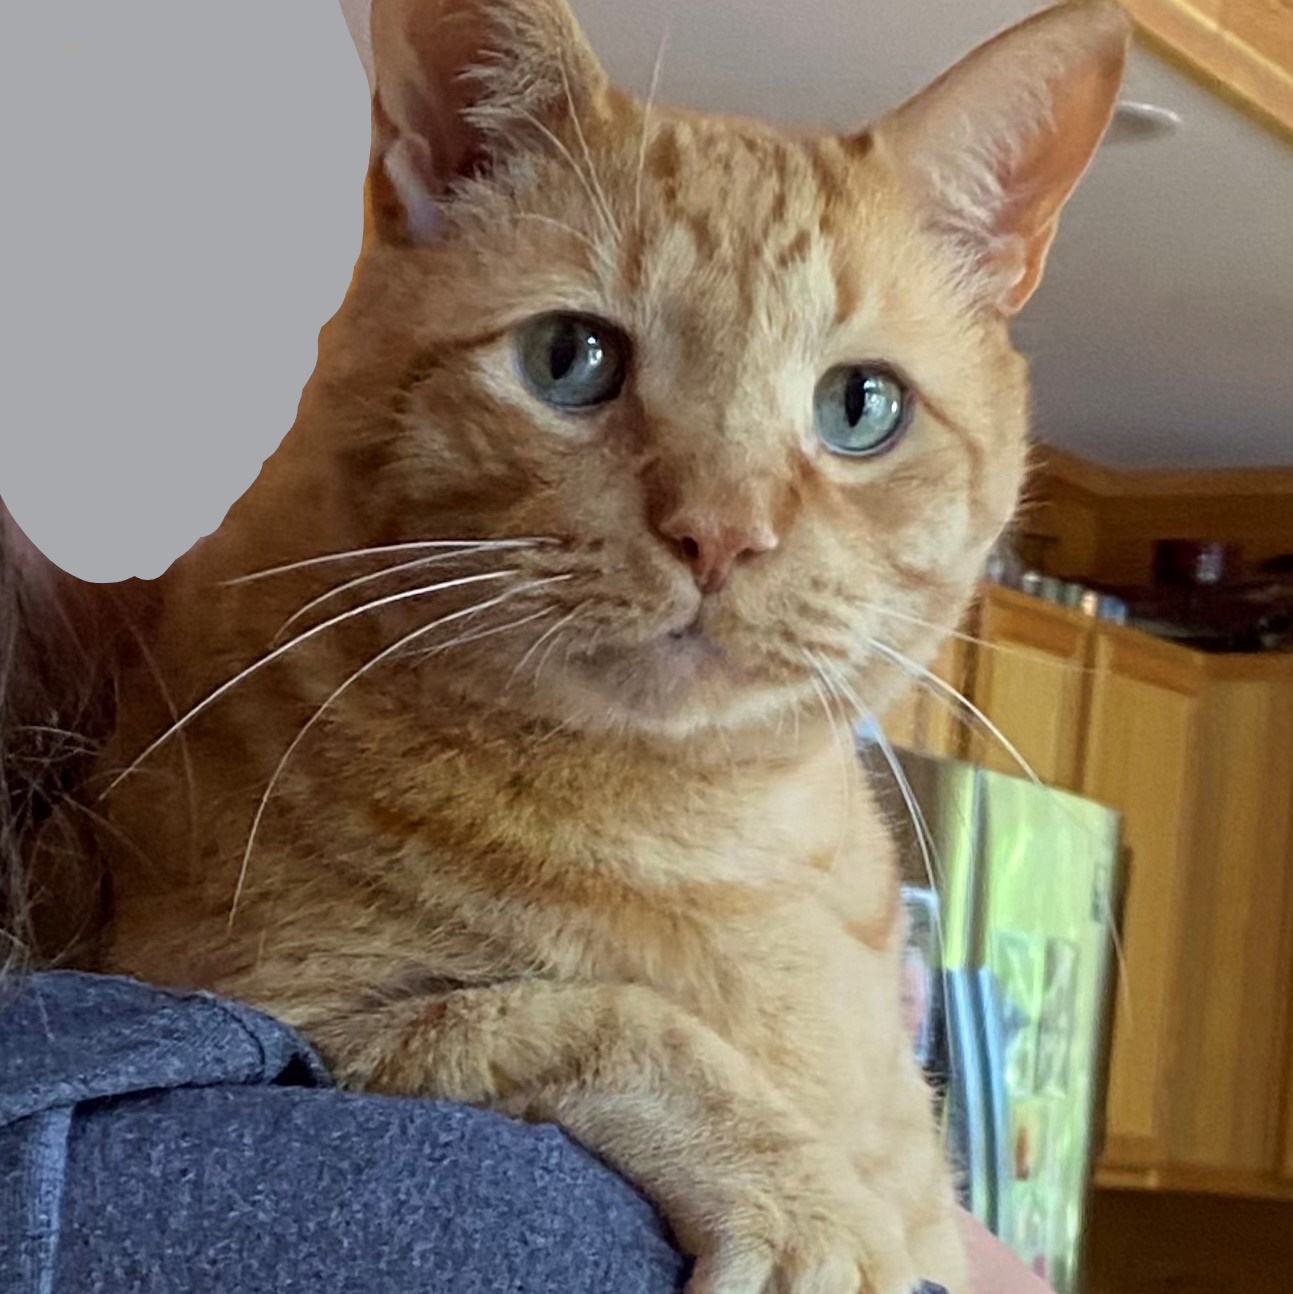 a picture of stanley being held over a person's shoulder like a baby. he is holding onto the person's sleeve with his claws and looks at the camera with his soulful eyes